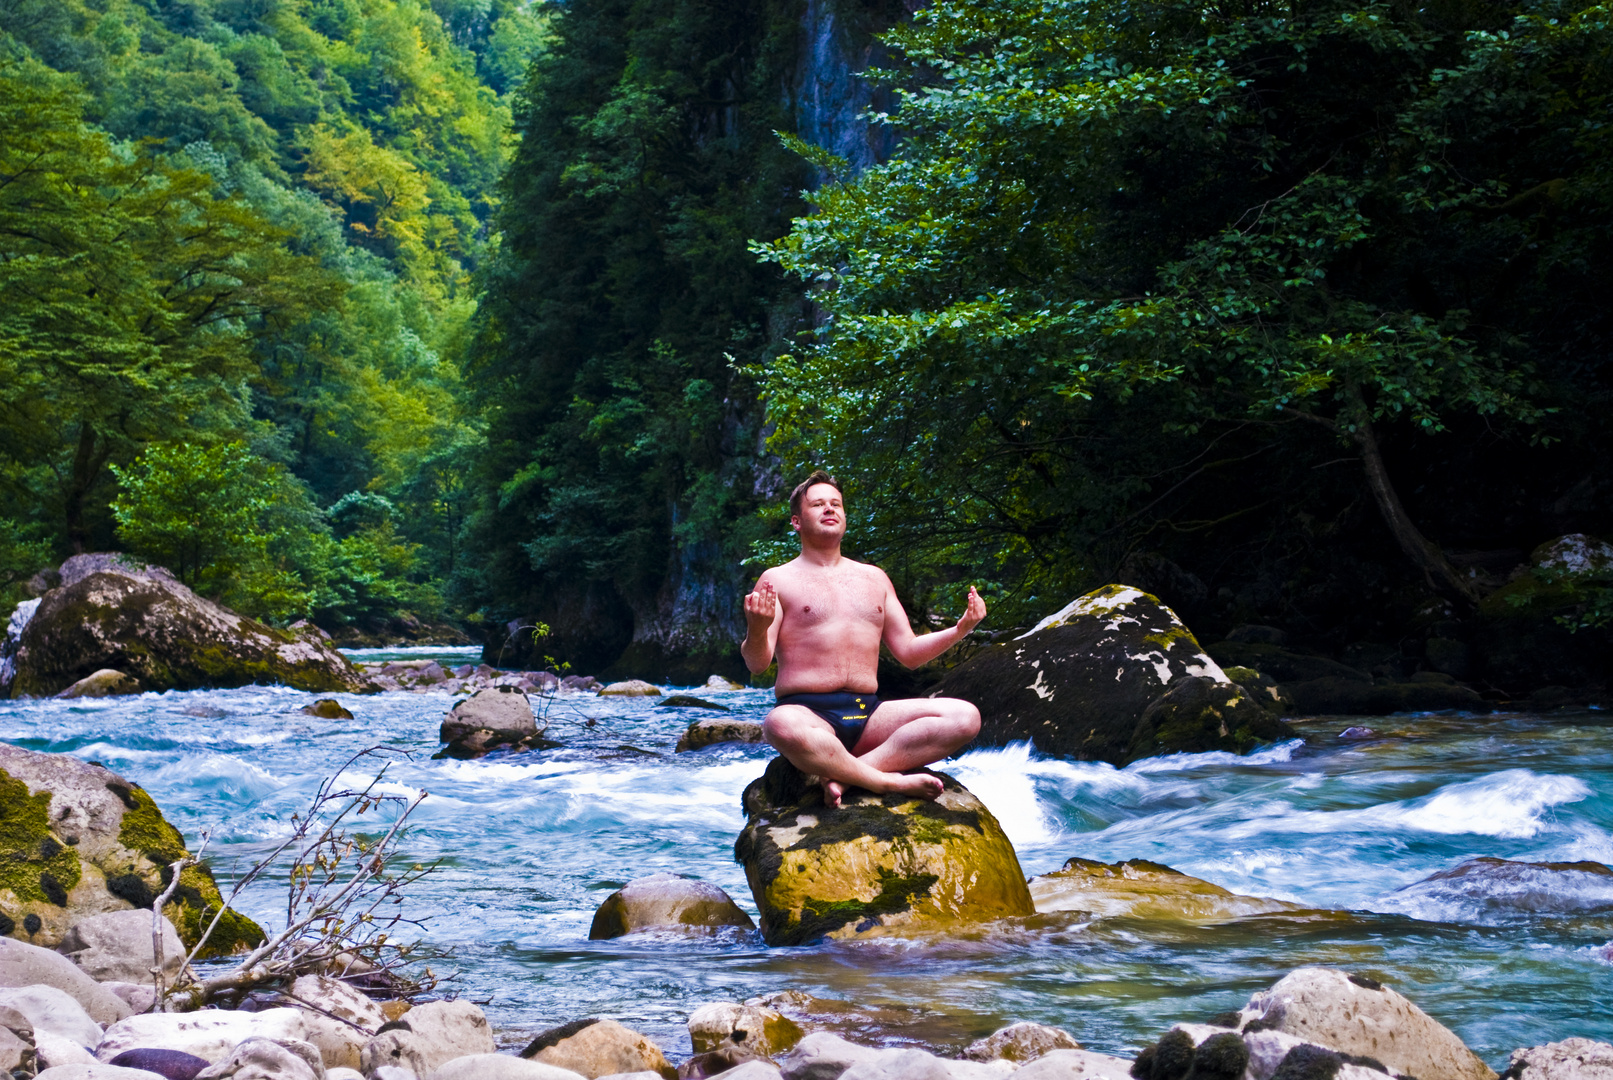 Meditation in the middle of a mountain river